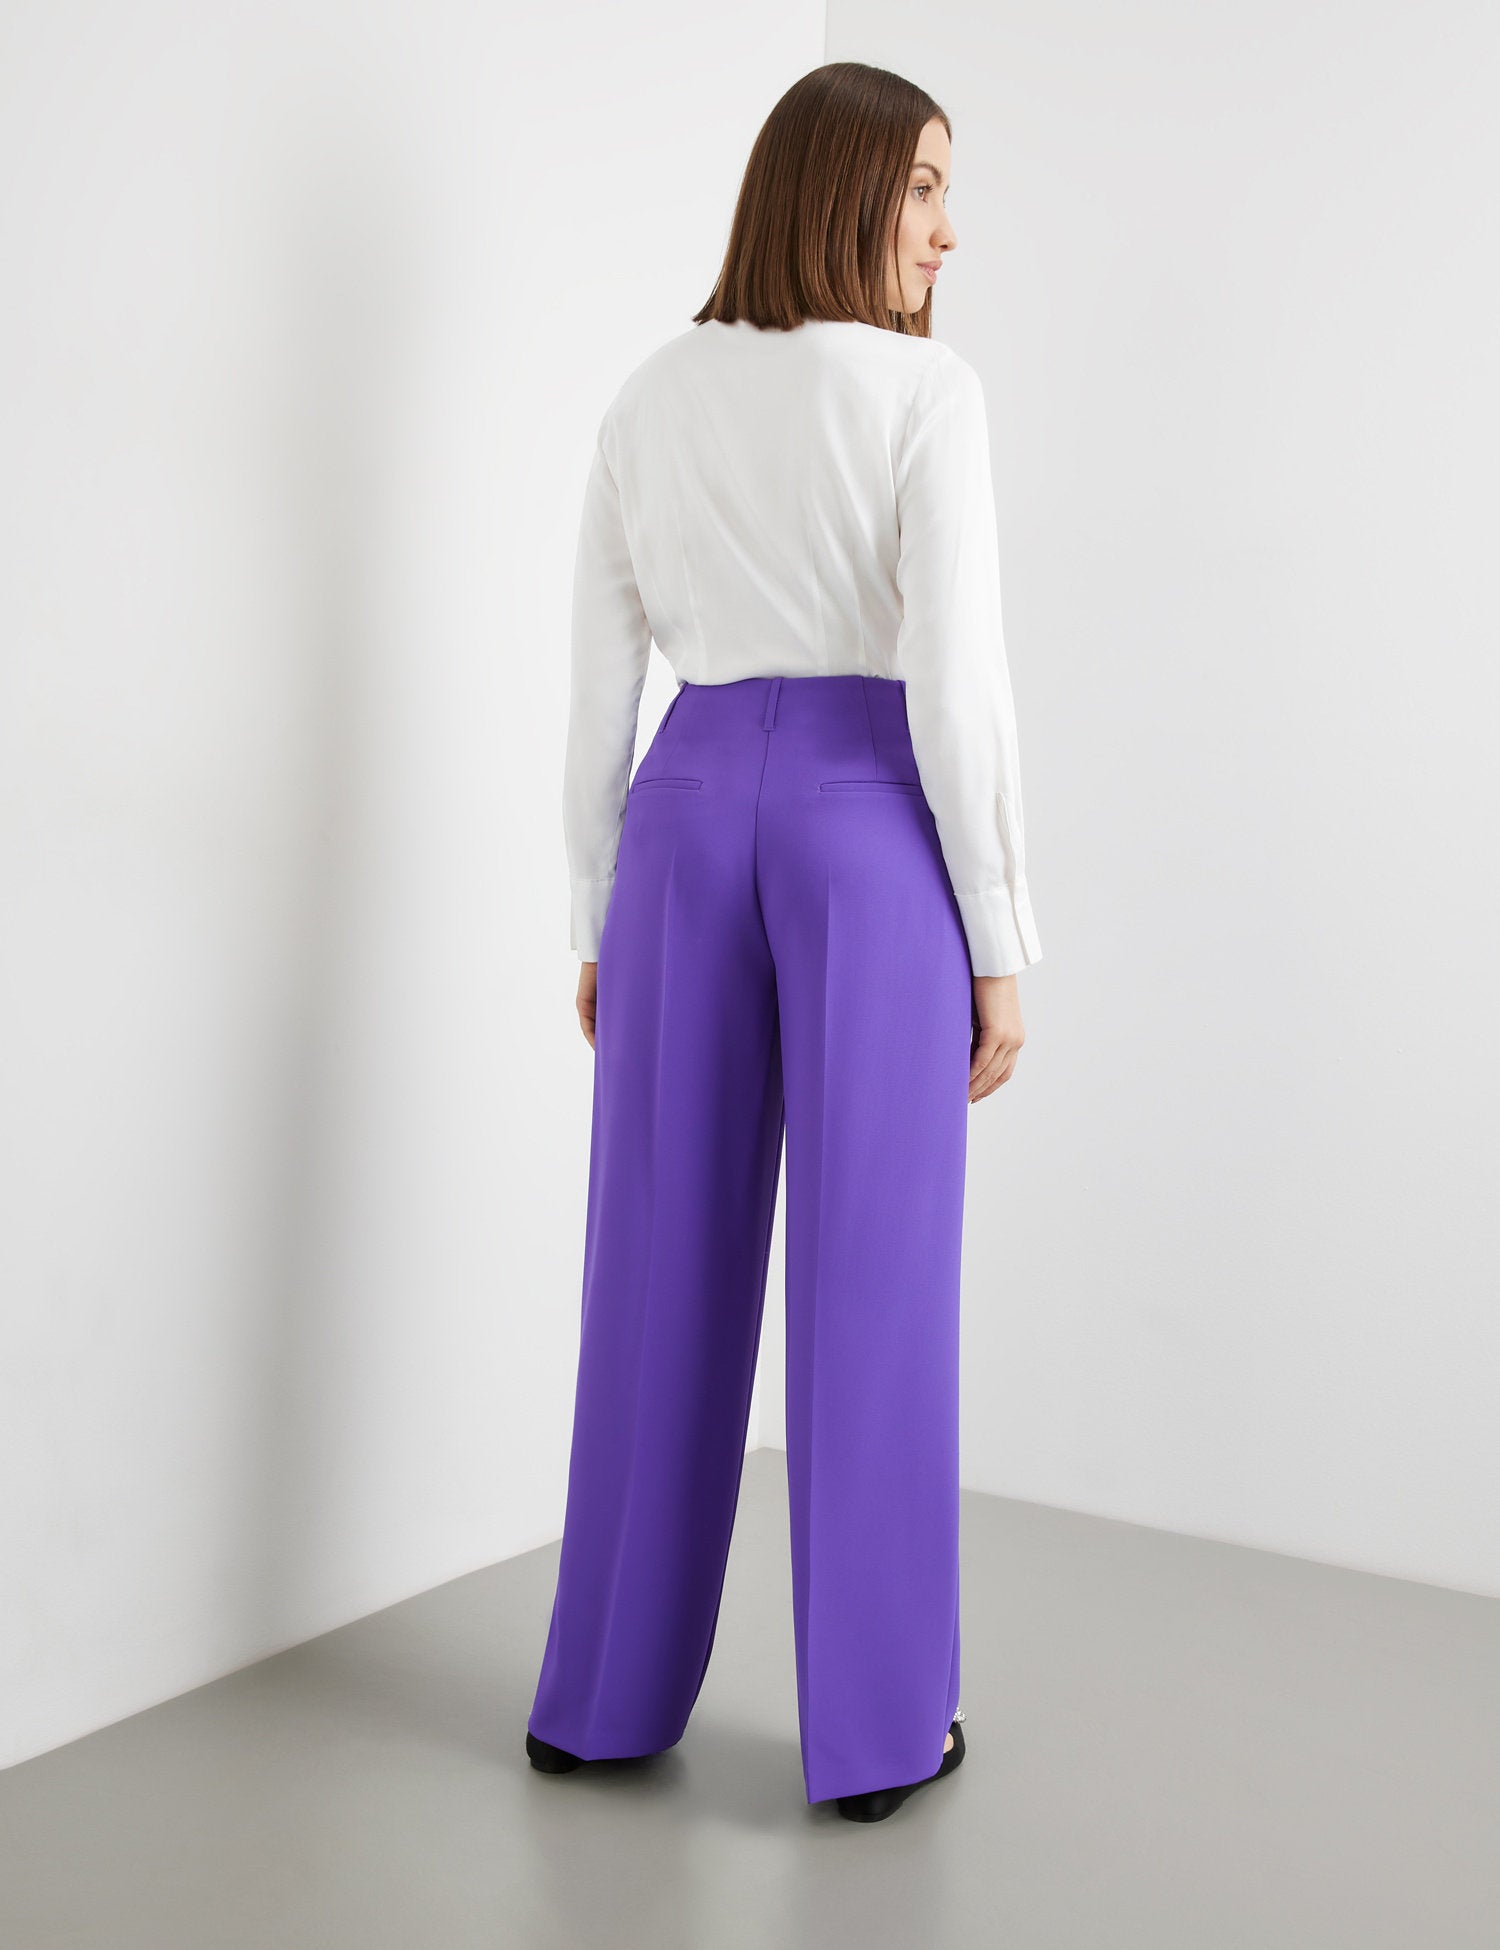 Elegant Wide-Leg Trousers Made Of Stretch Fabric_520303-11054_8810_06